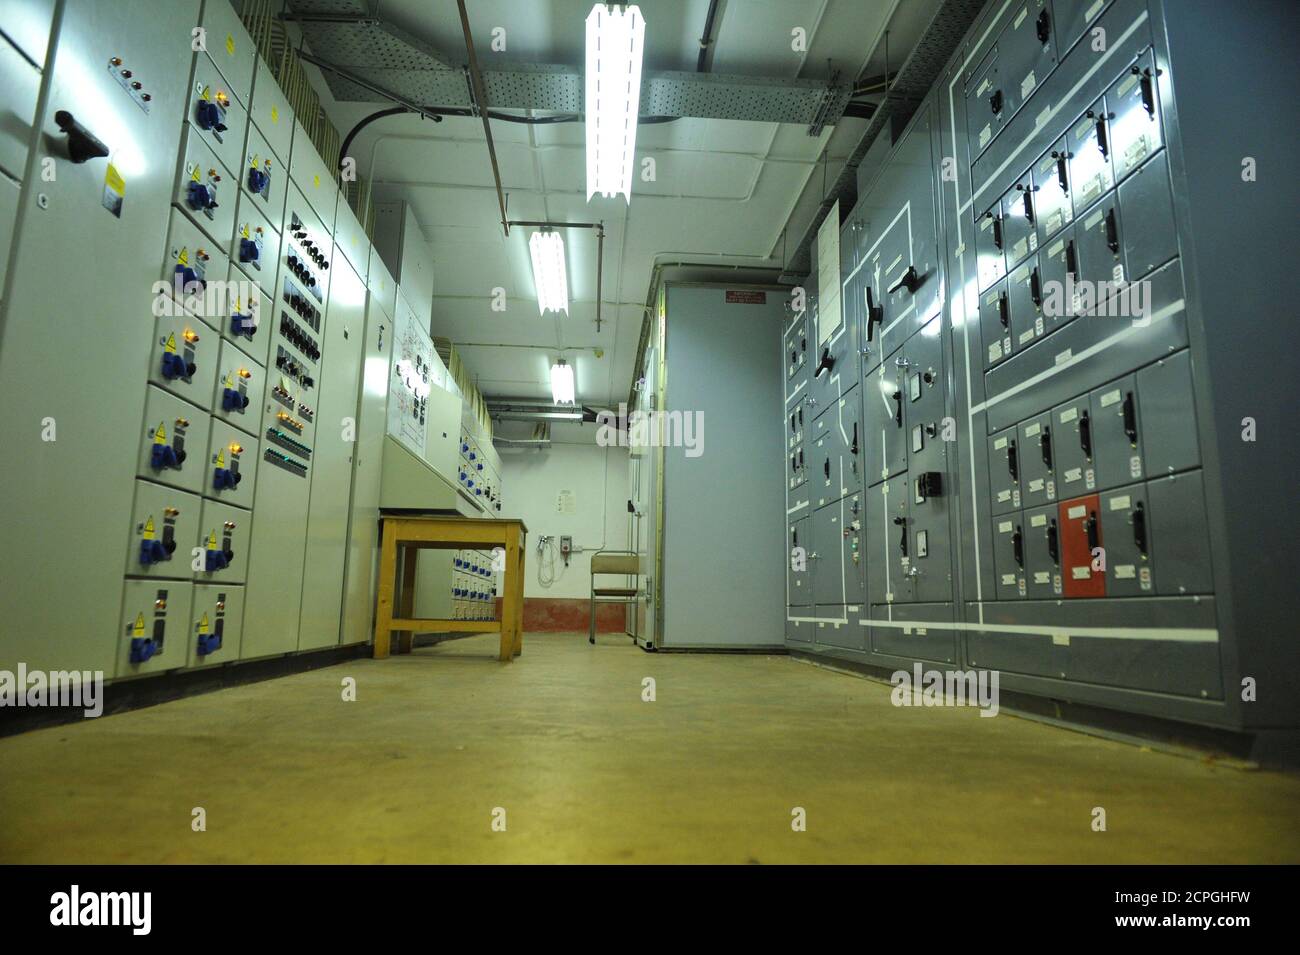 The main generator room is seen in a former Regional Government HQ Nuclear bunker built by the British government during the Cold War which  has come up for sale in Ballymena, Northern Ireland on February 4, 2016. It is owned by the Office of Northern Ireland's First Minister and Deputy First Minister and capable of accommodating 236 personnel for extended periods. A large range of the original fixtures and fittings are to be included in the sale. It is believed to be one of the most technically advanced bunkers built in the UK with an array of advanced life support systems. In the event of a  Stock Photo